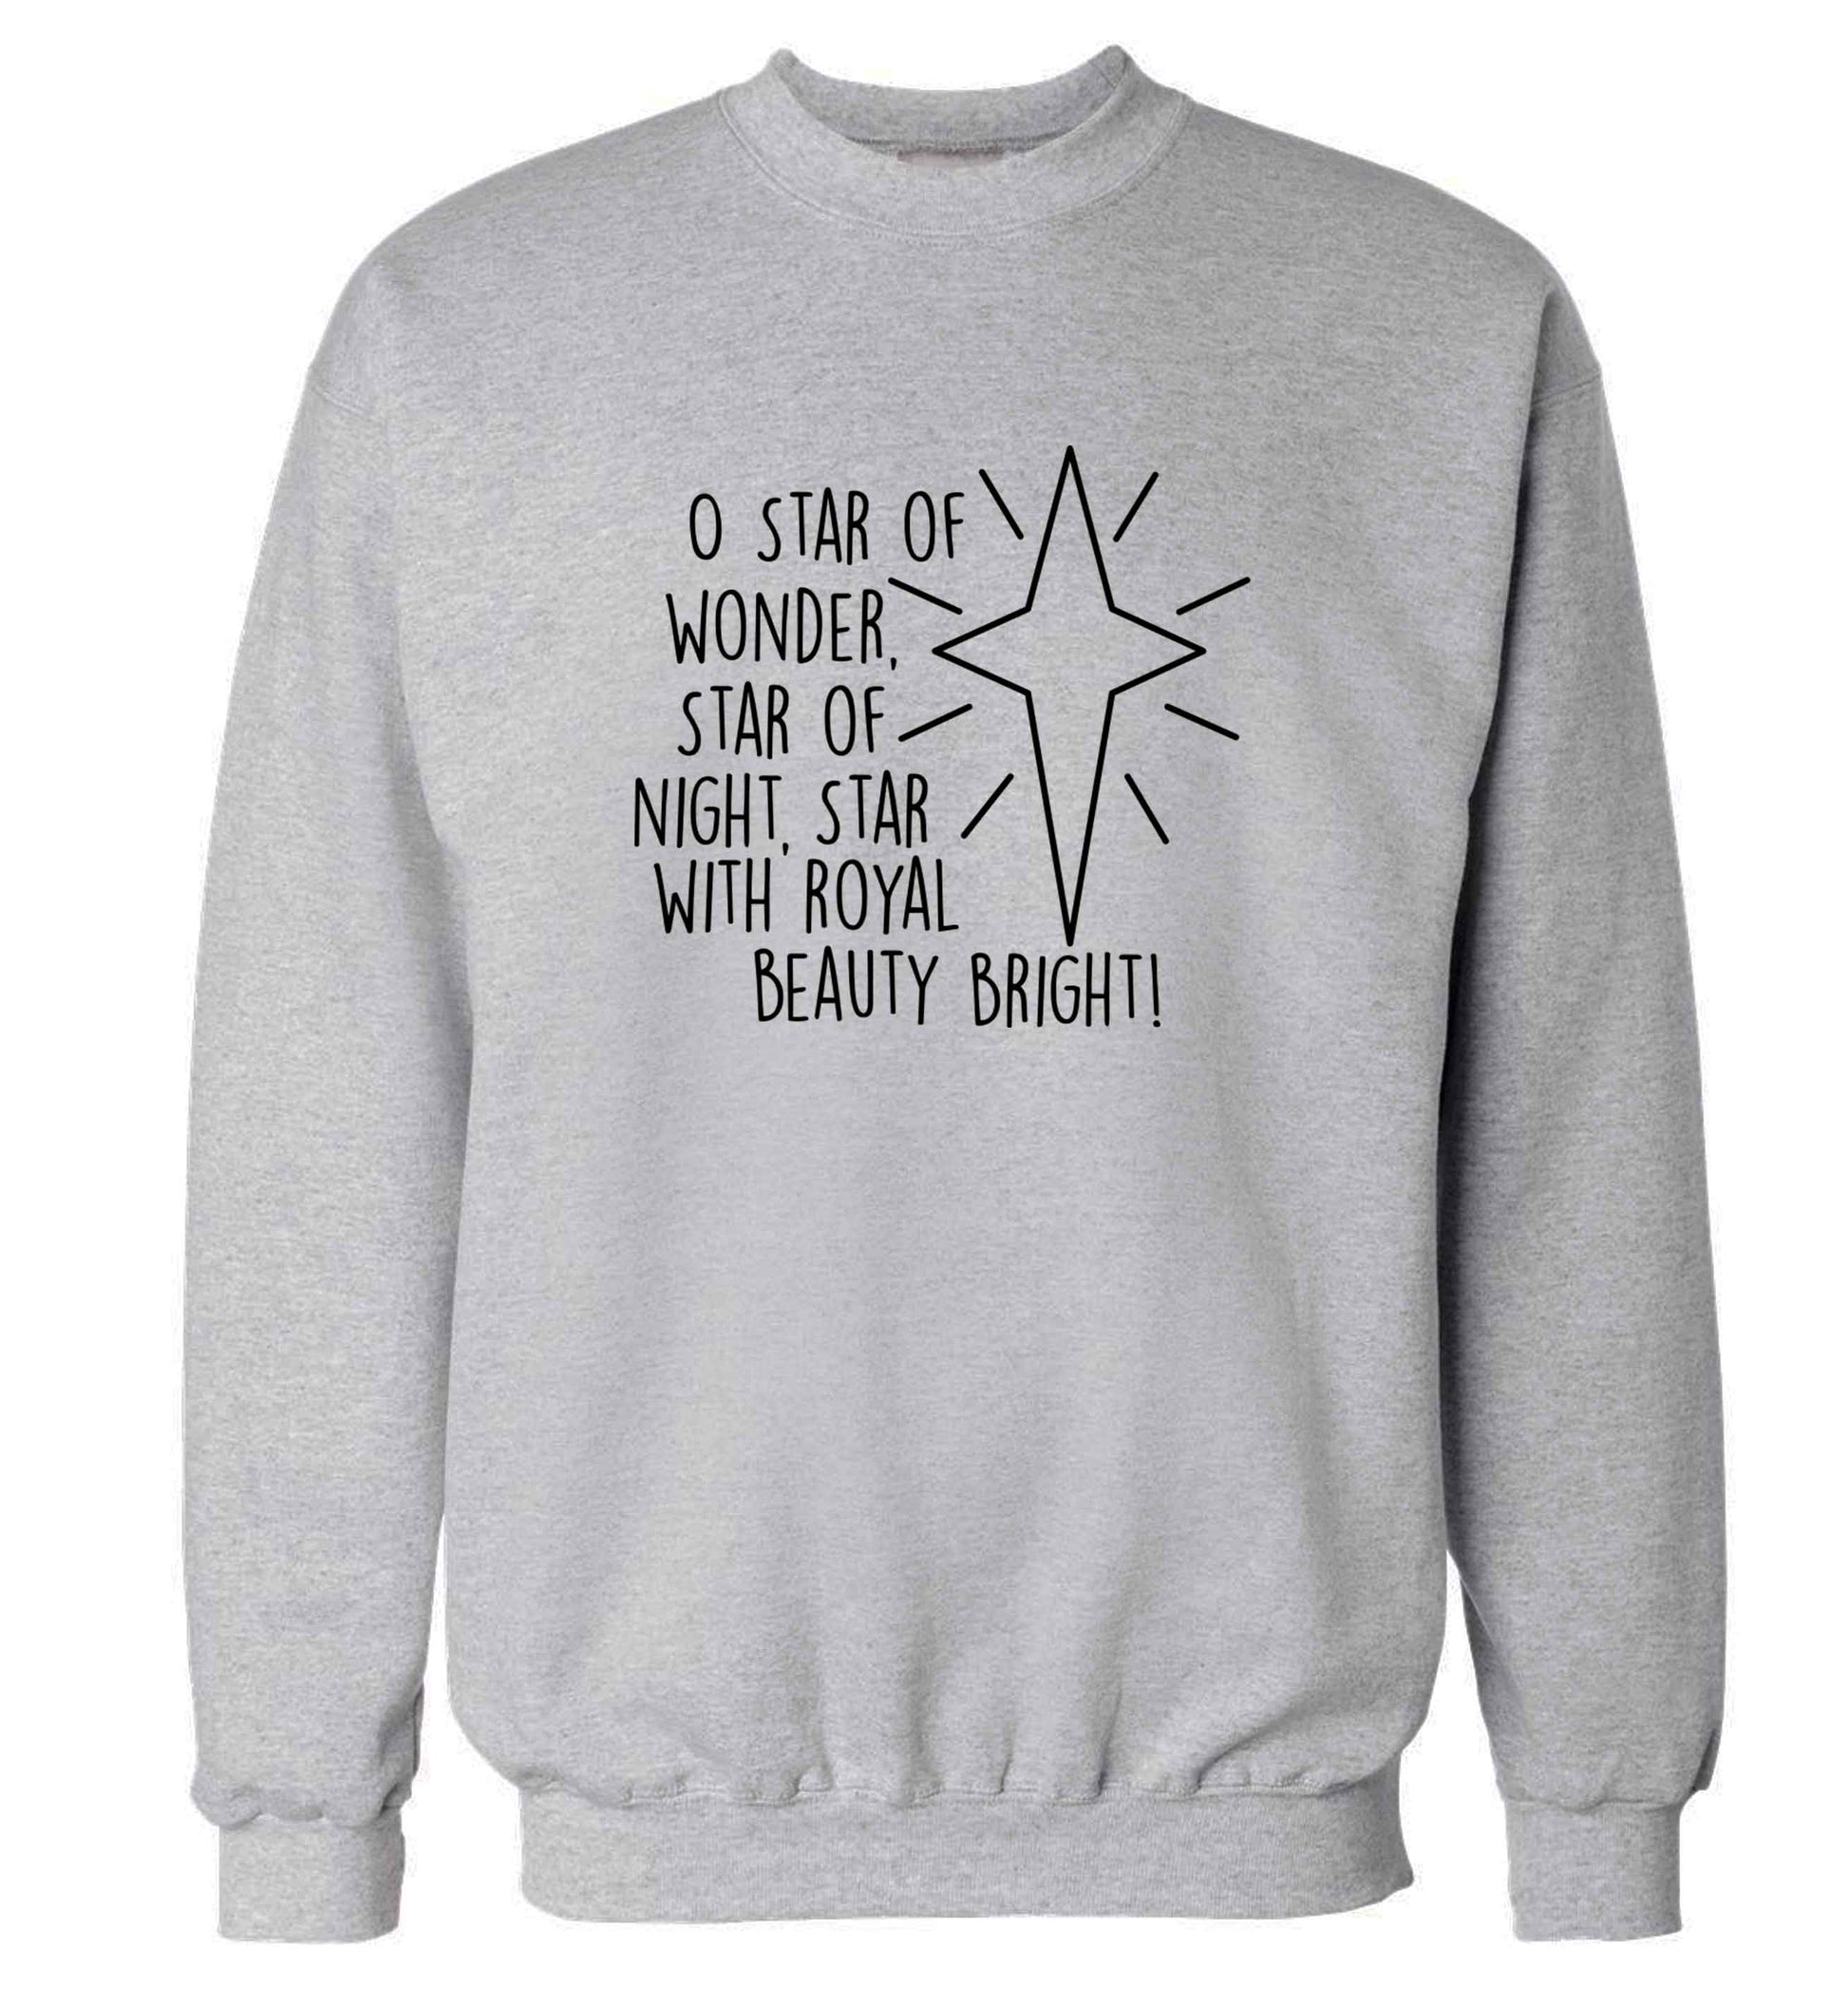 Oh star of wonder star of night, star with royal beauty bright adult's unisex grey sweater 2XL